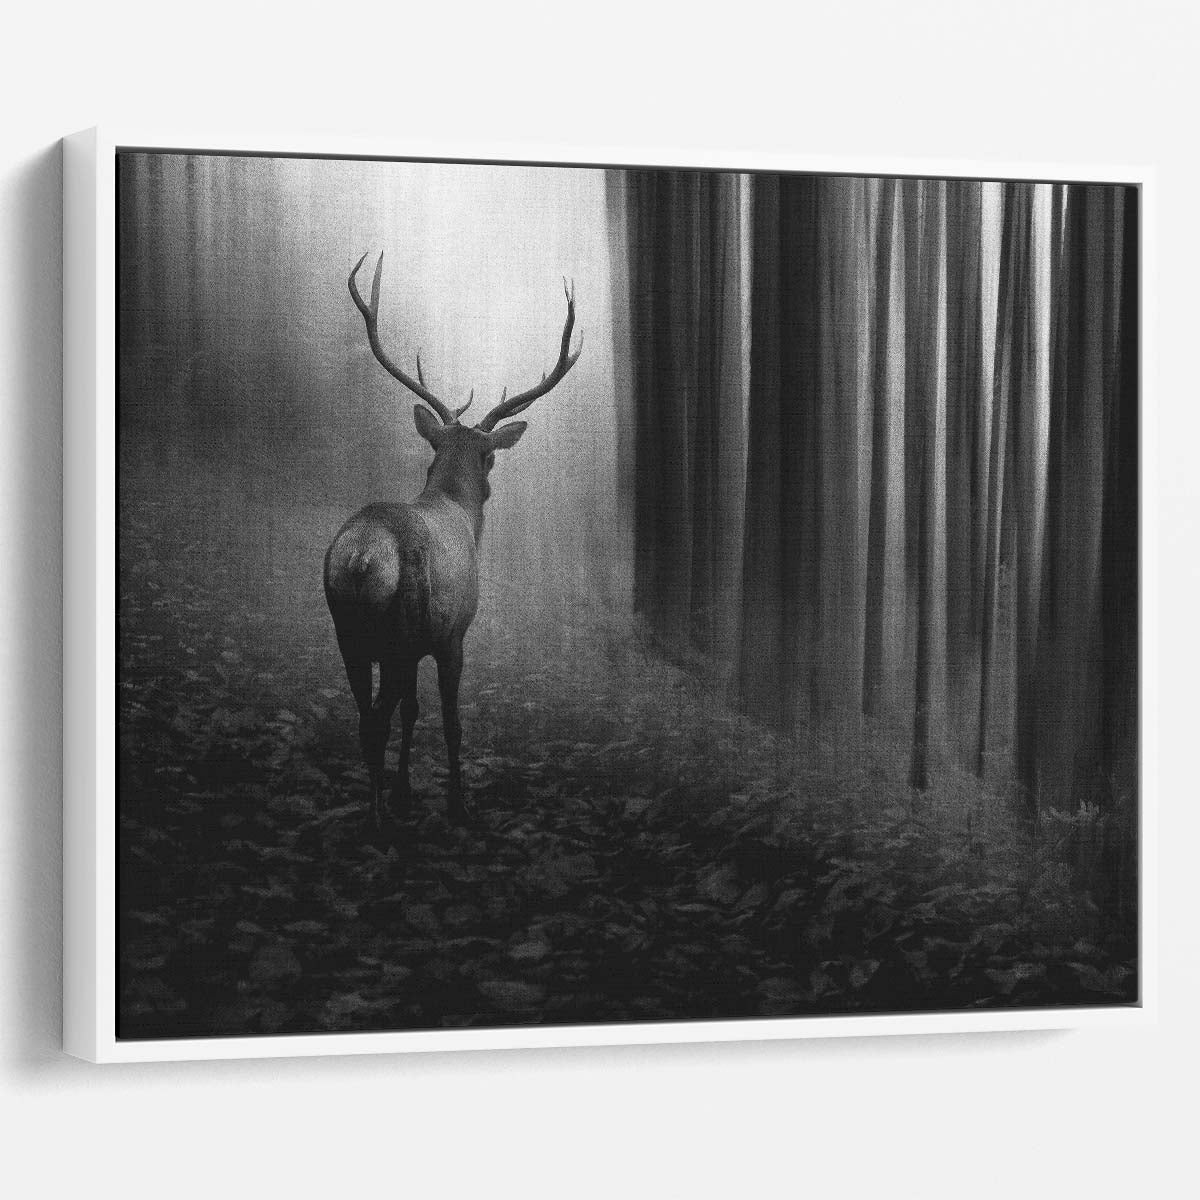 Majestic Stag in Monochrome Forest Landscape Wall Art by Luxuriance Designs. Made in USA.